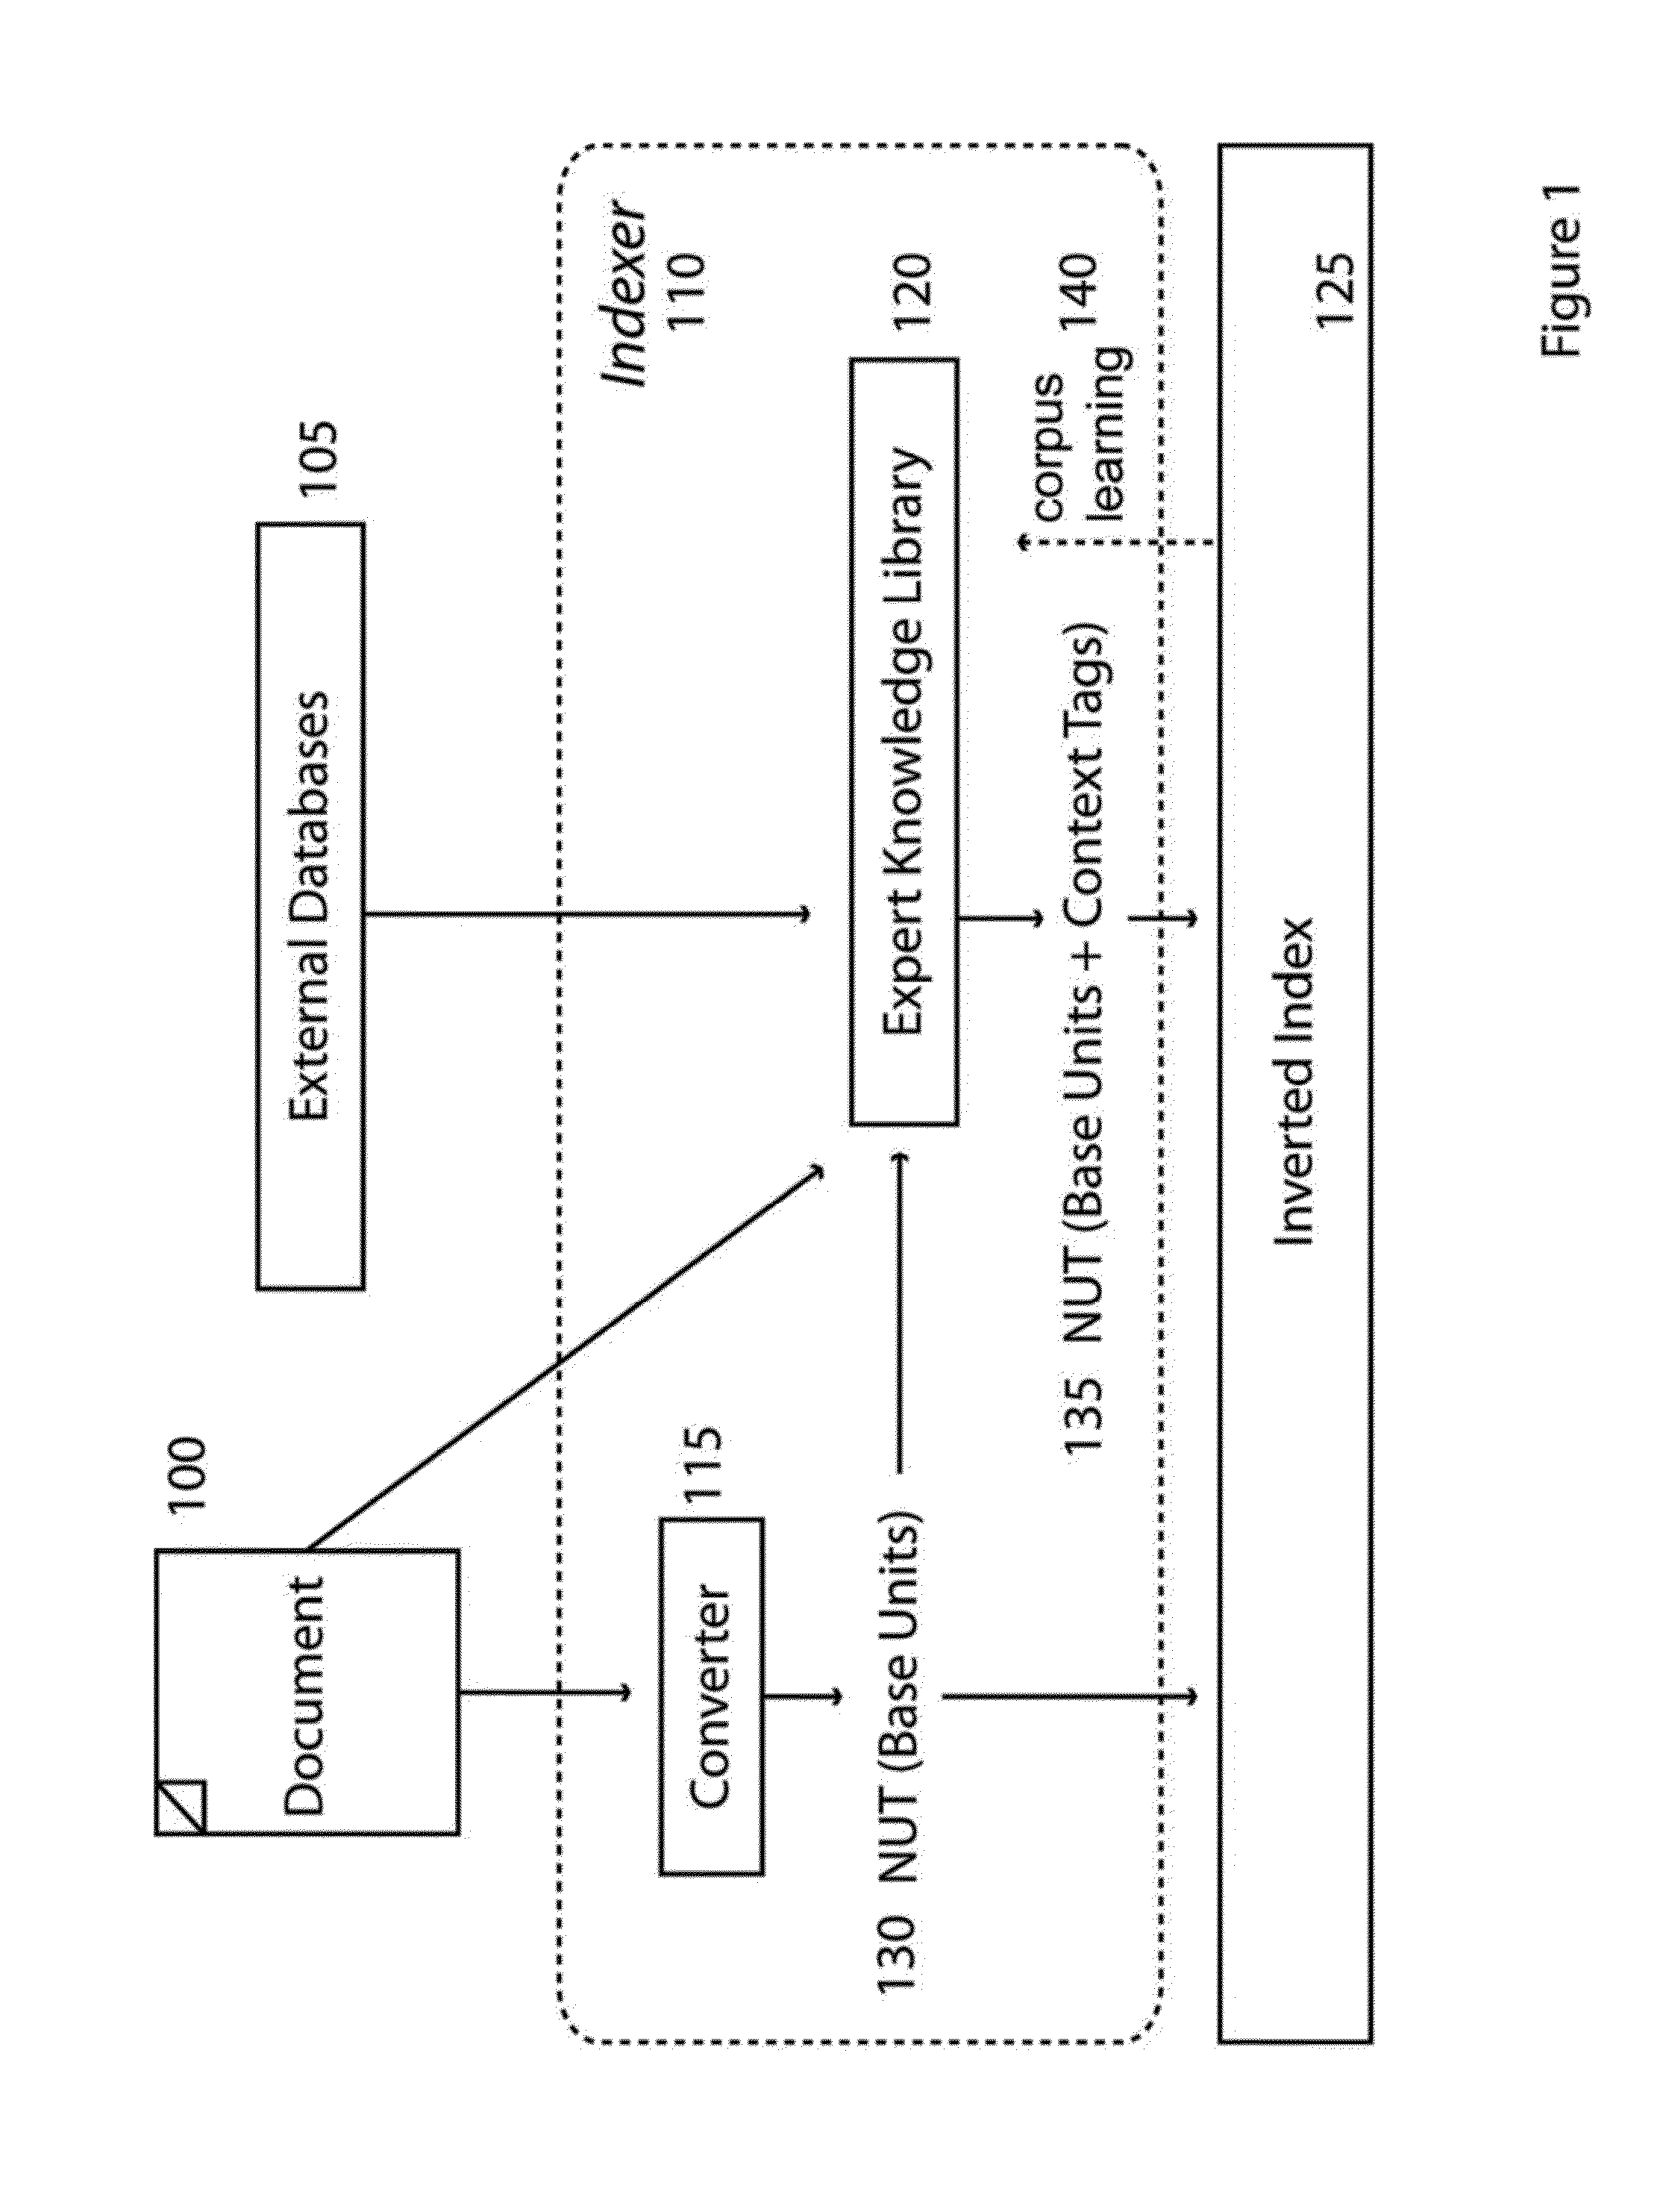 System and methods for units-based numeric information retrieval